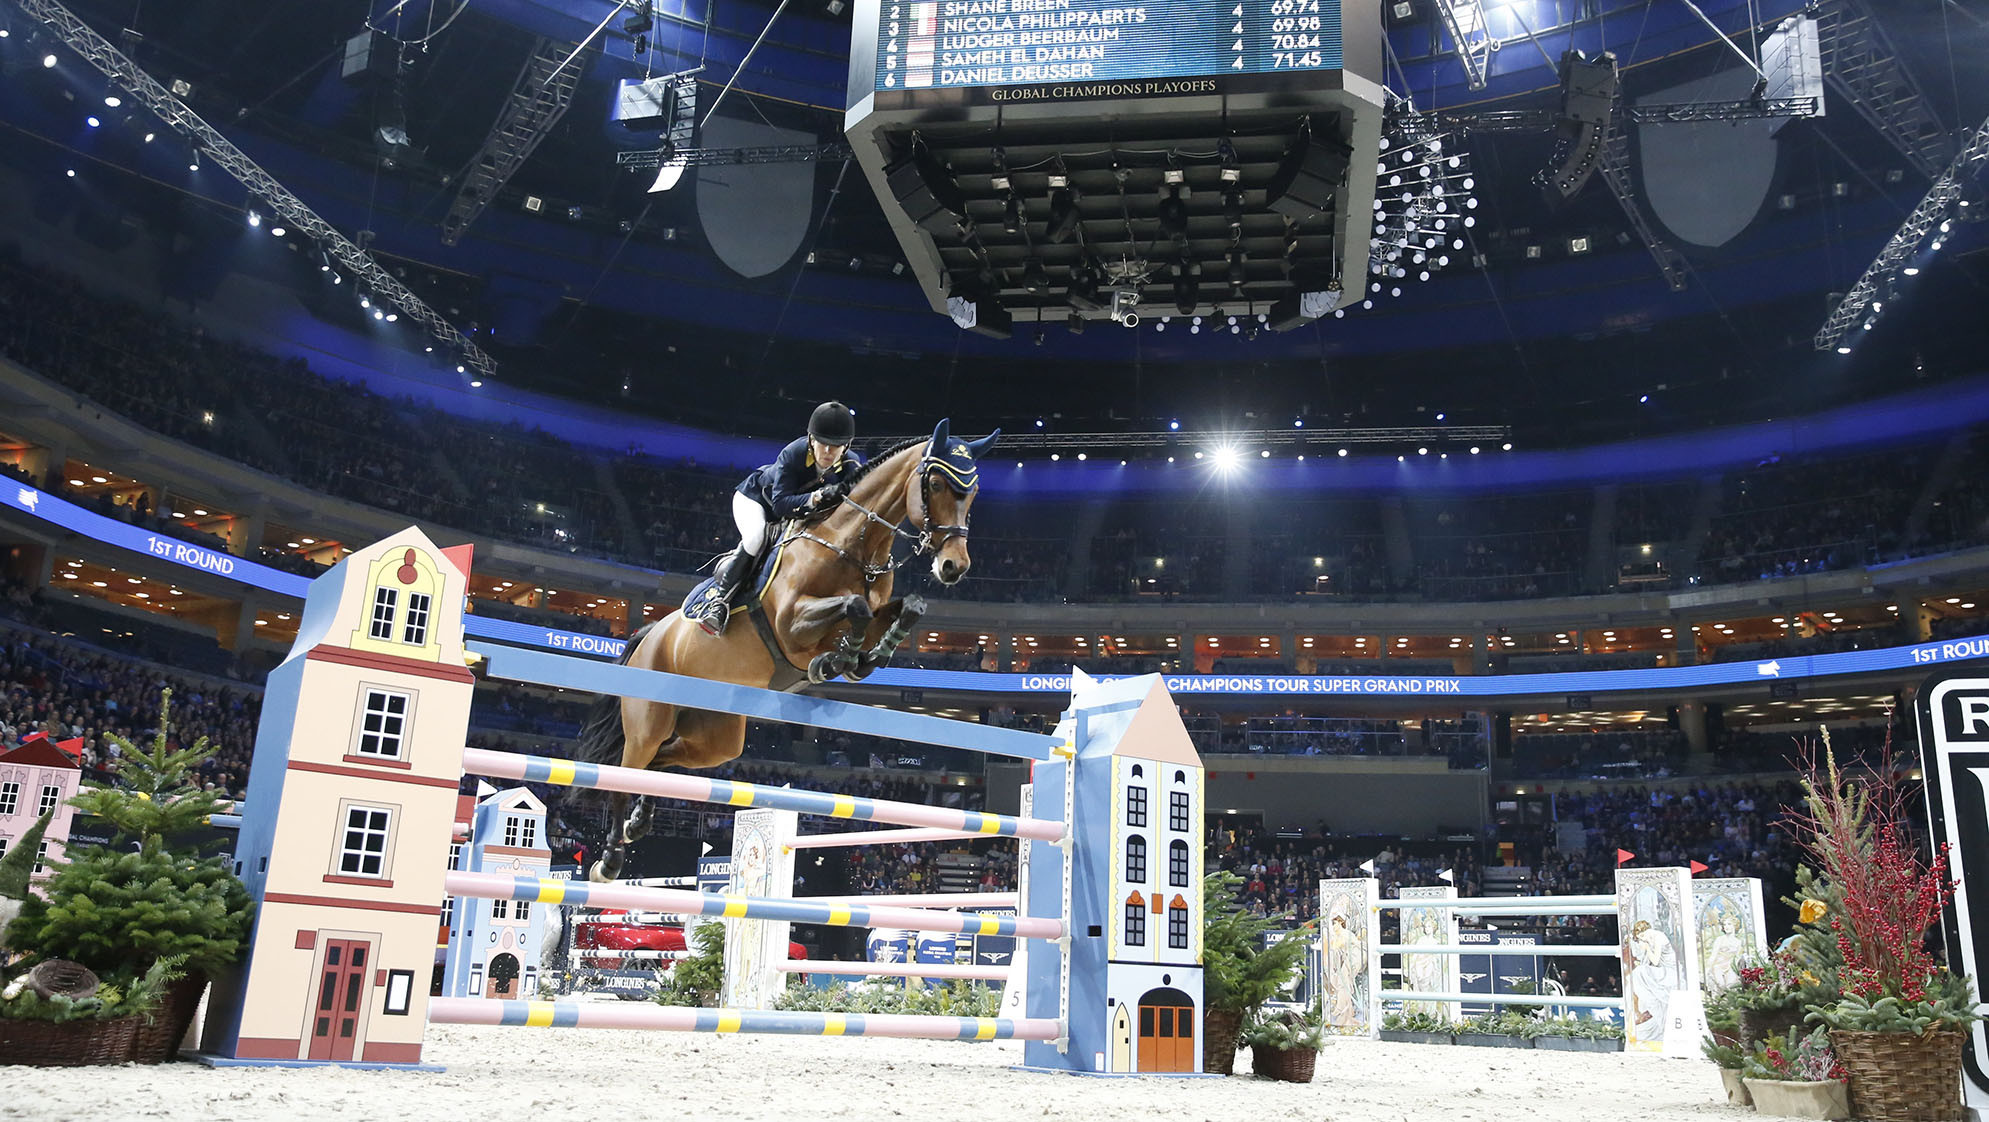 World's best showjumpers ready to compete at Global Champions Prague Playoffs